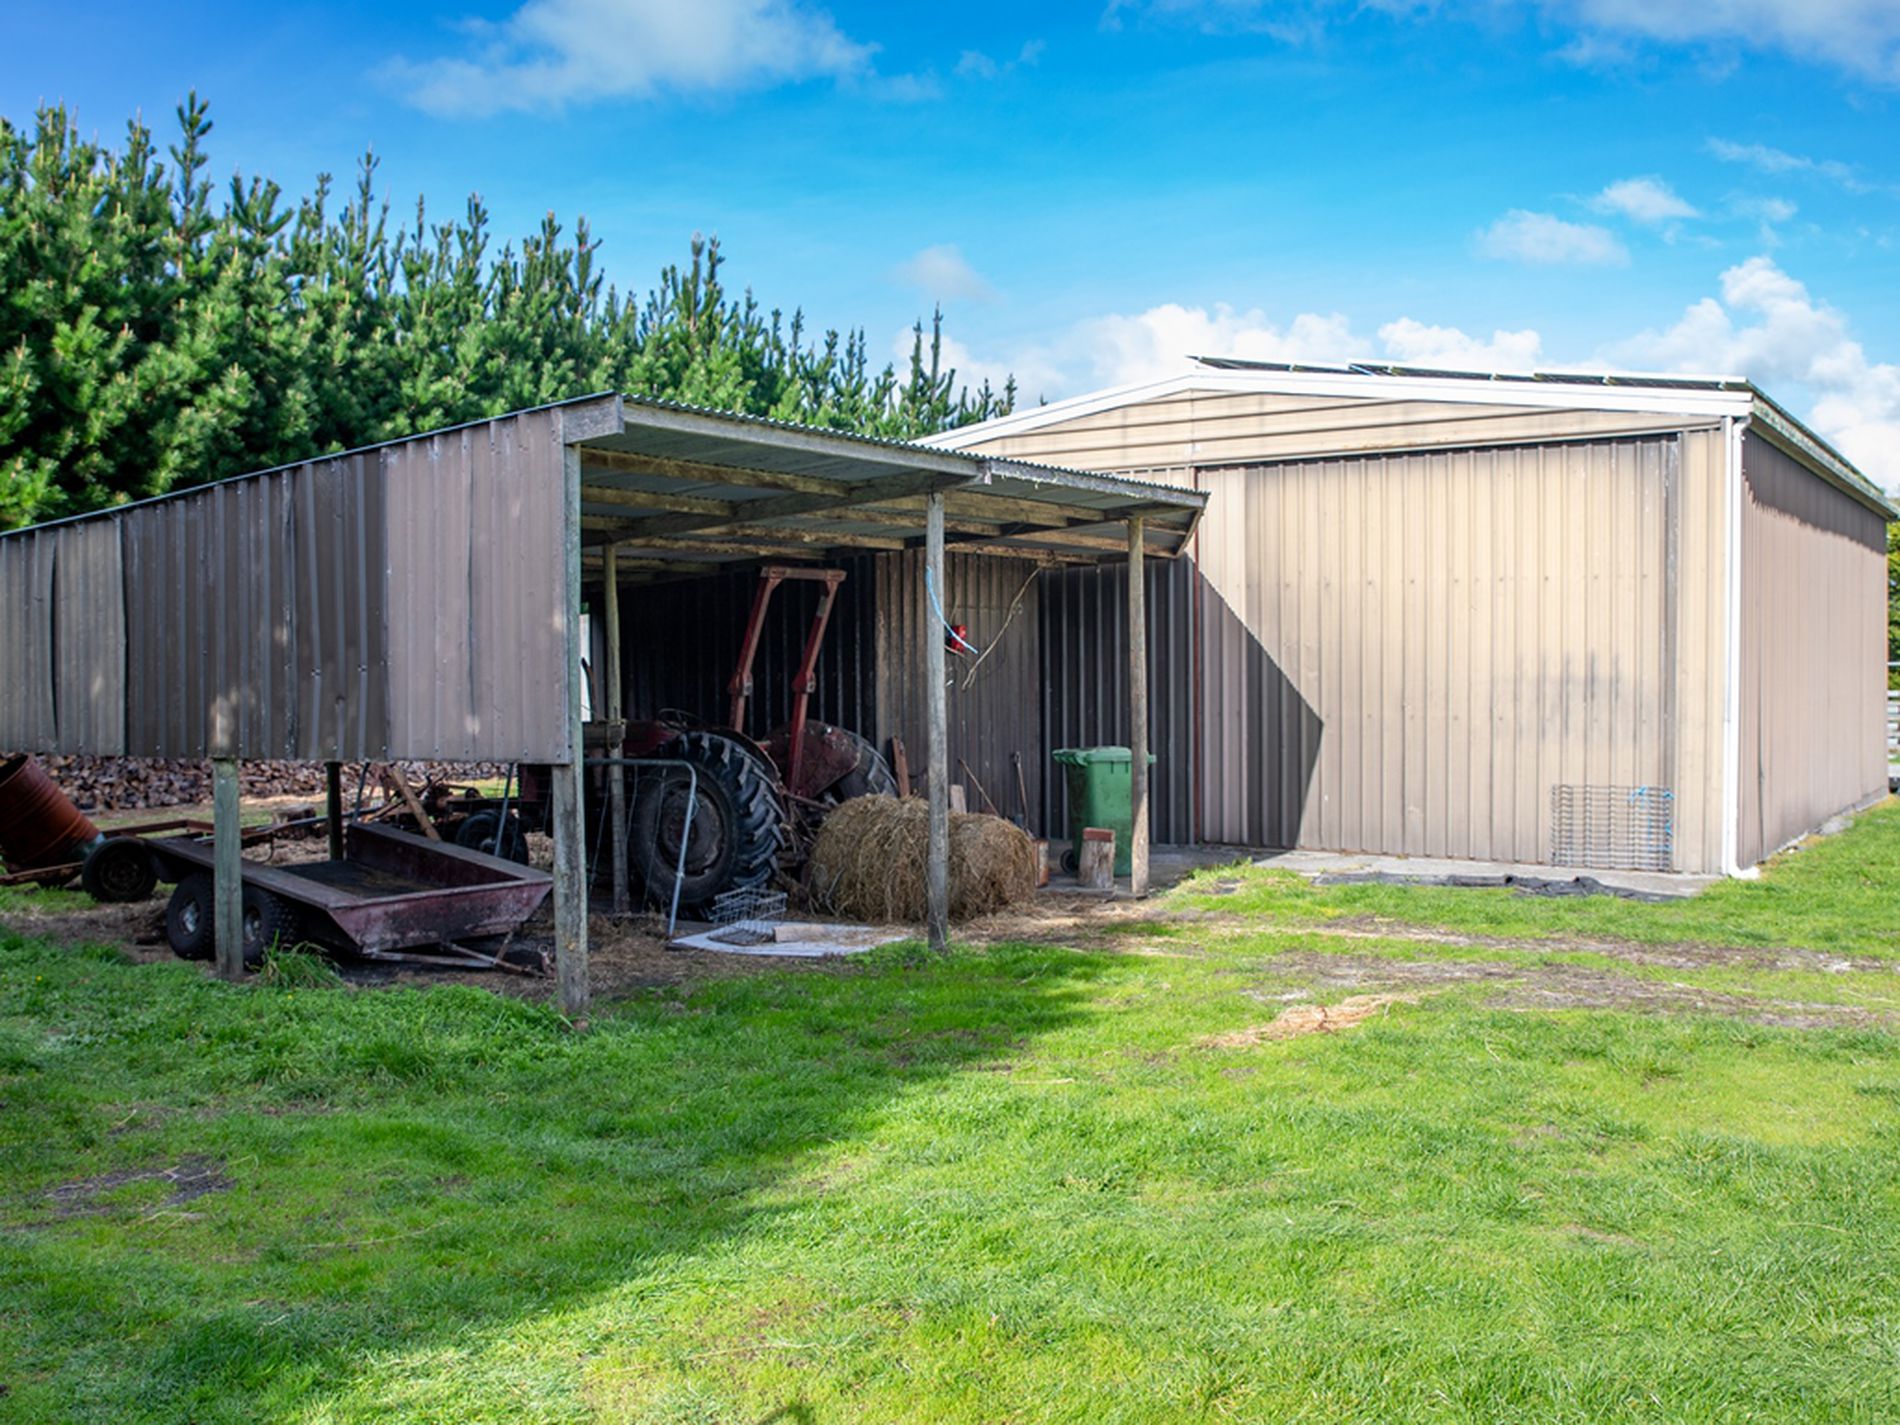 53 Old Stanley Road West, Smithton